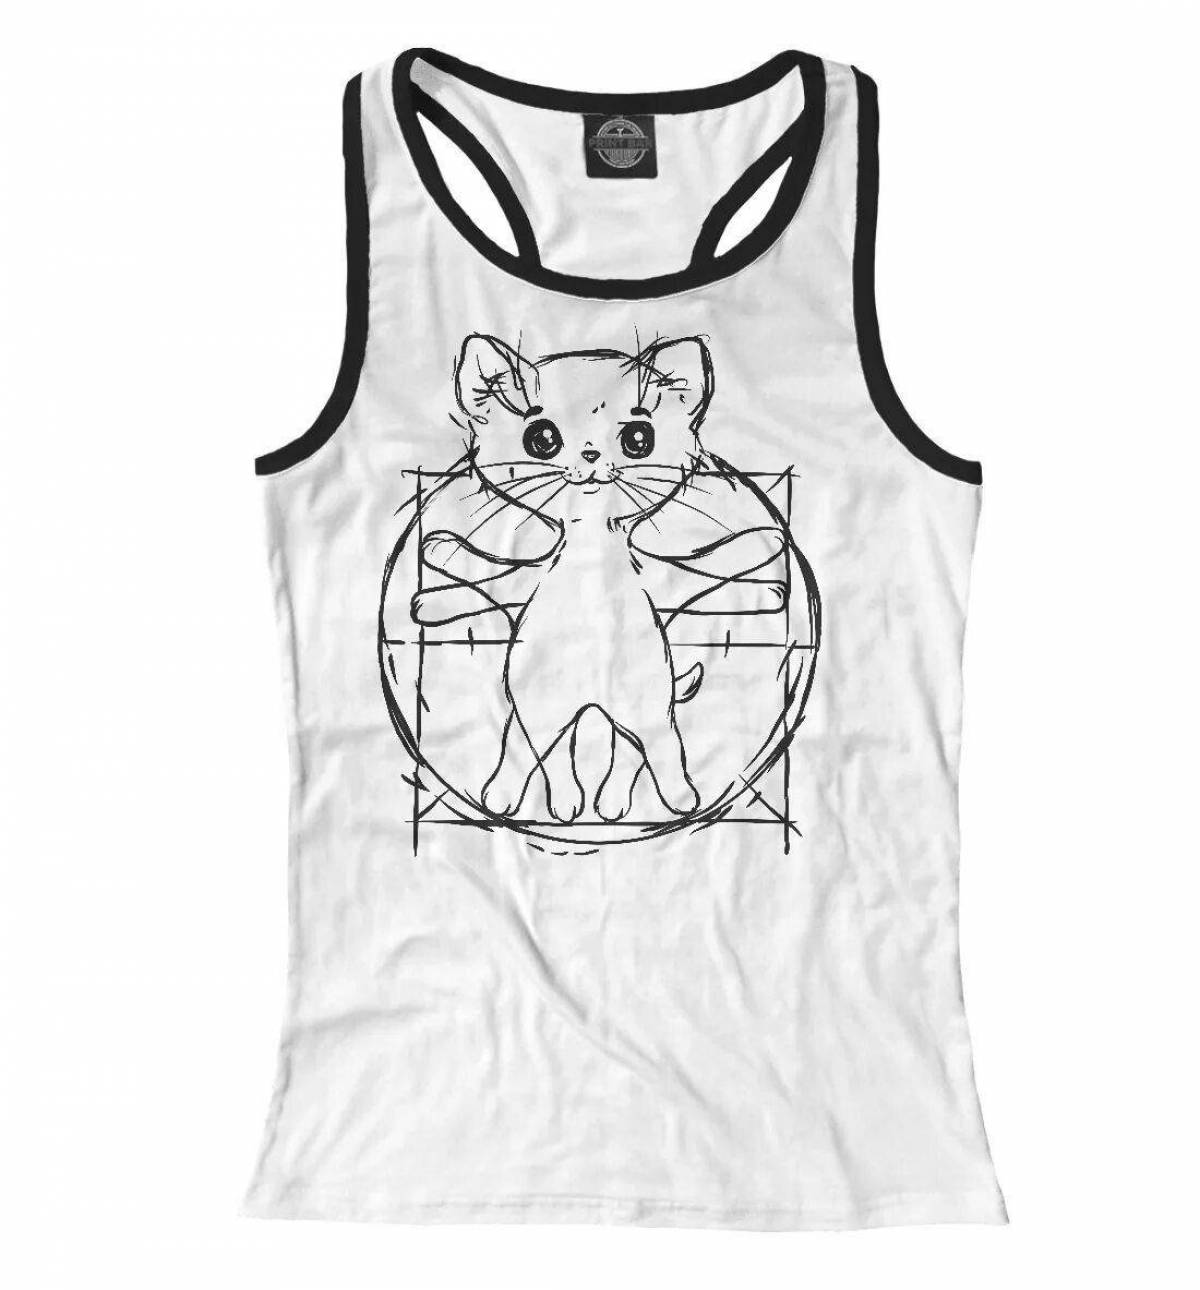 Coloring t-shirt with quirky kitten